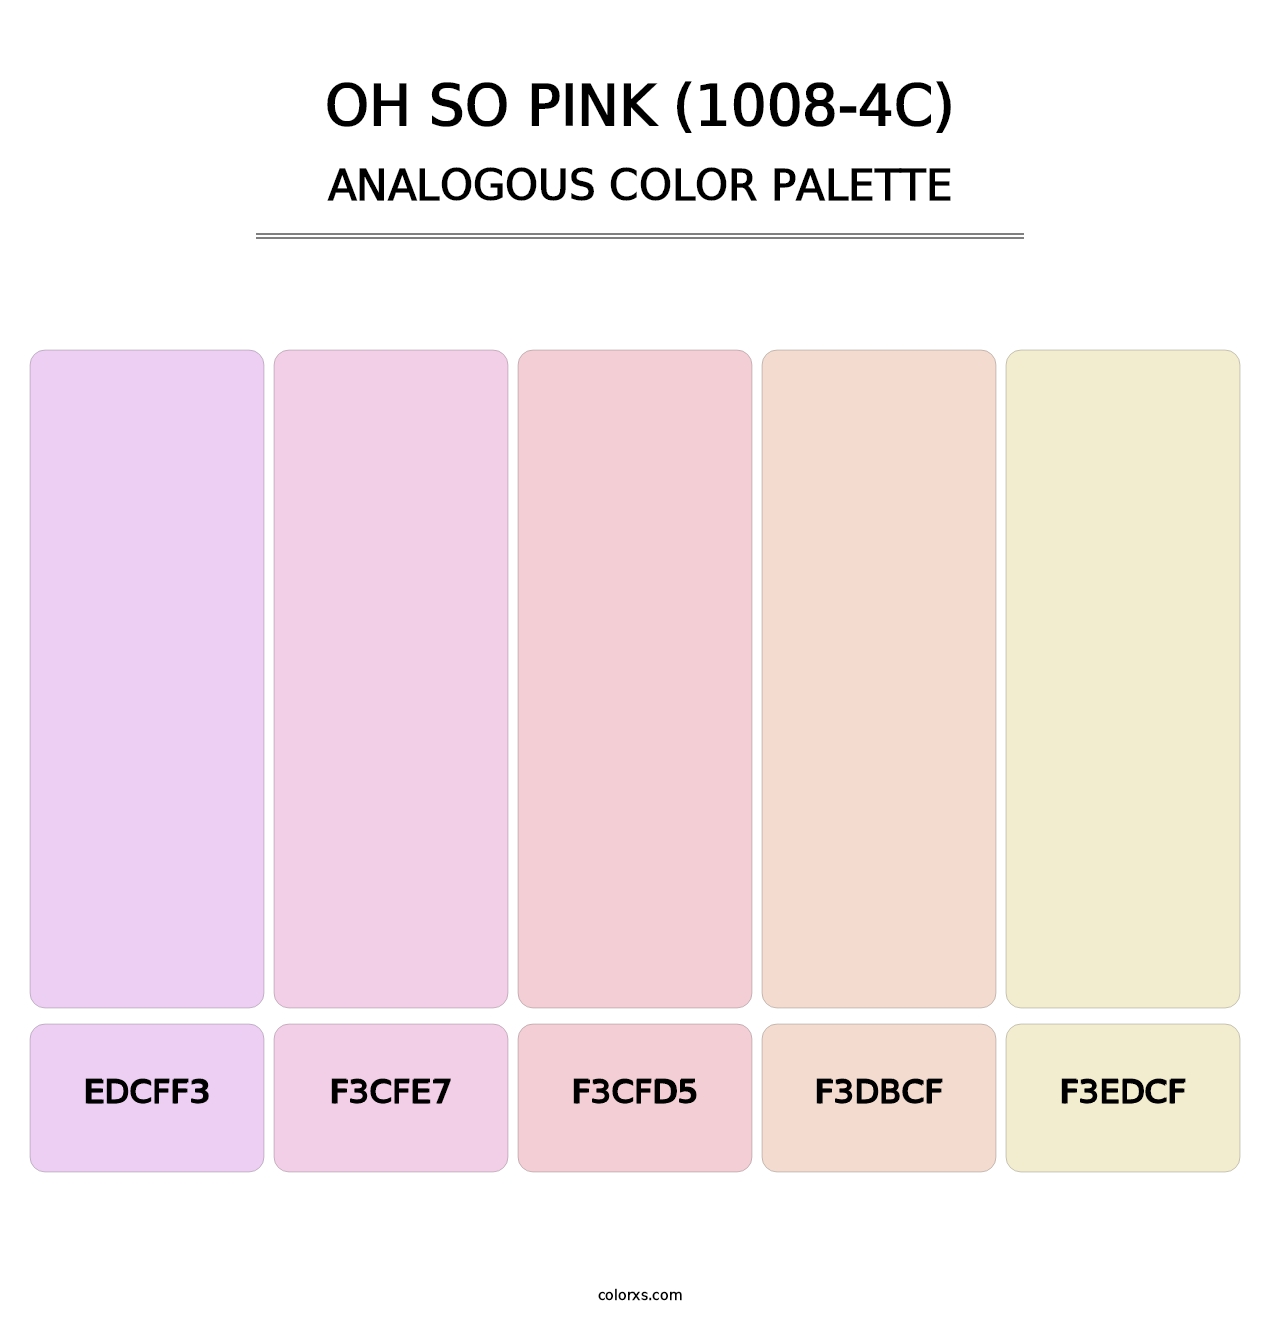 Oh So Pink (1008-4C) - Analogous Color Palette